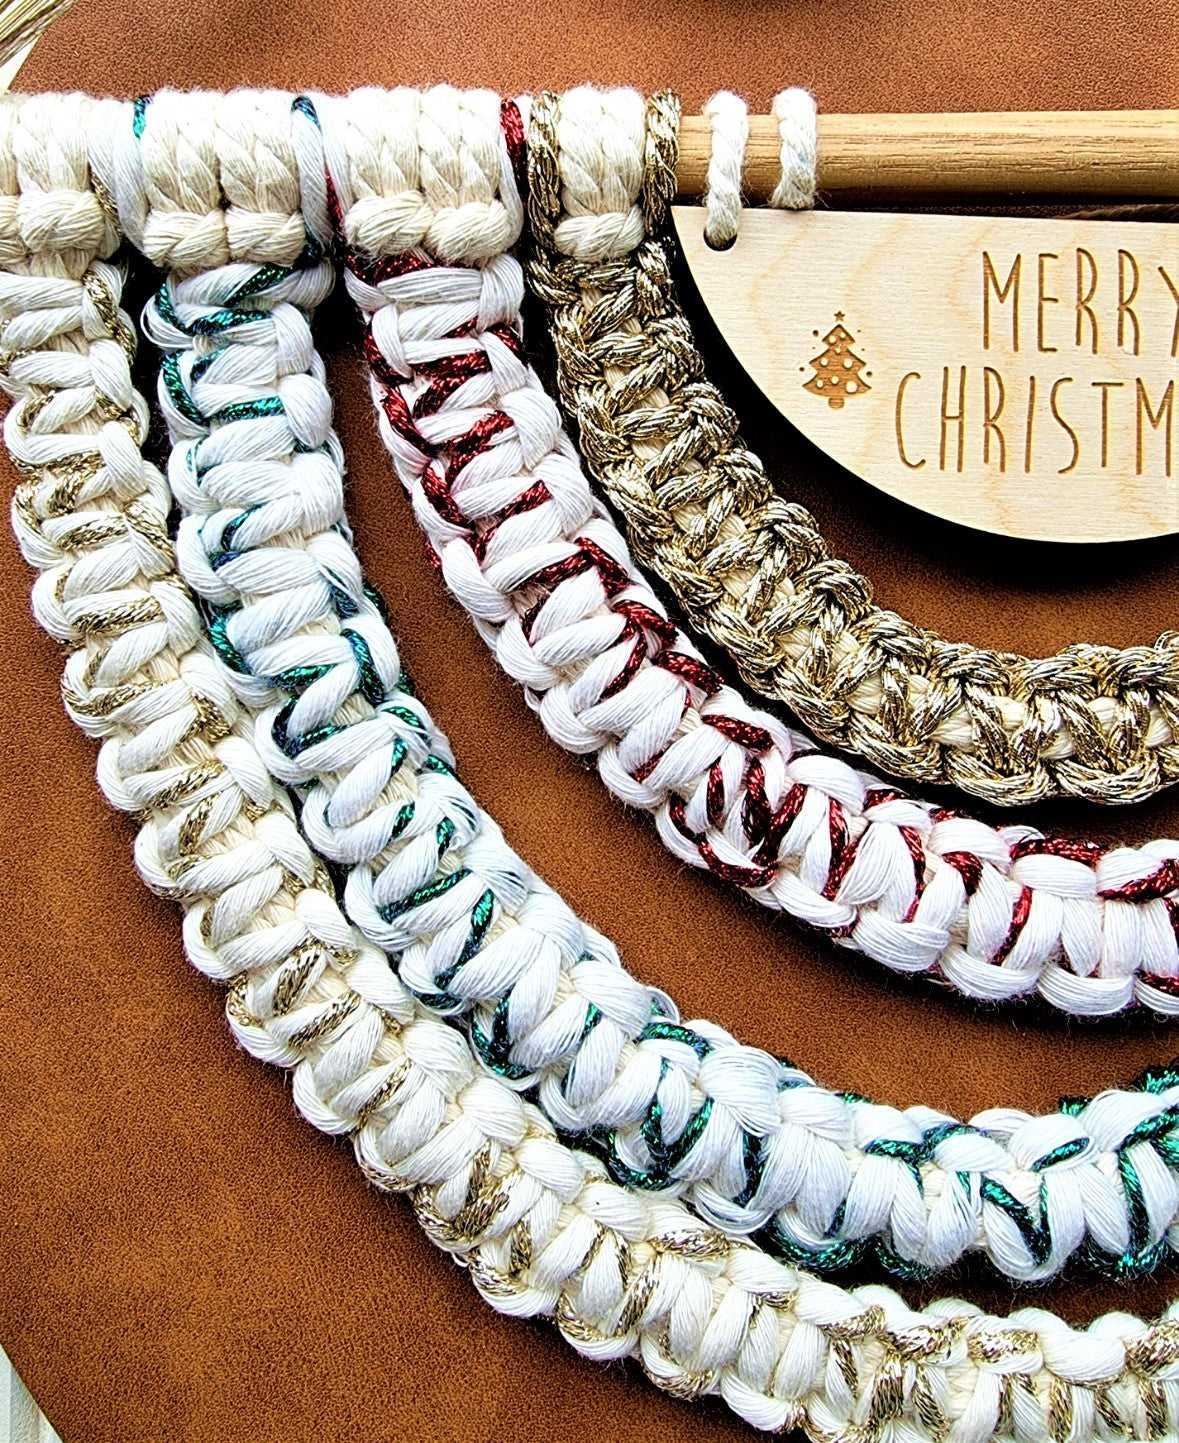 Macrame Rainbow Wall Hanging | Merry Christmas - Stardust Melbourne